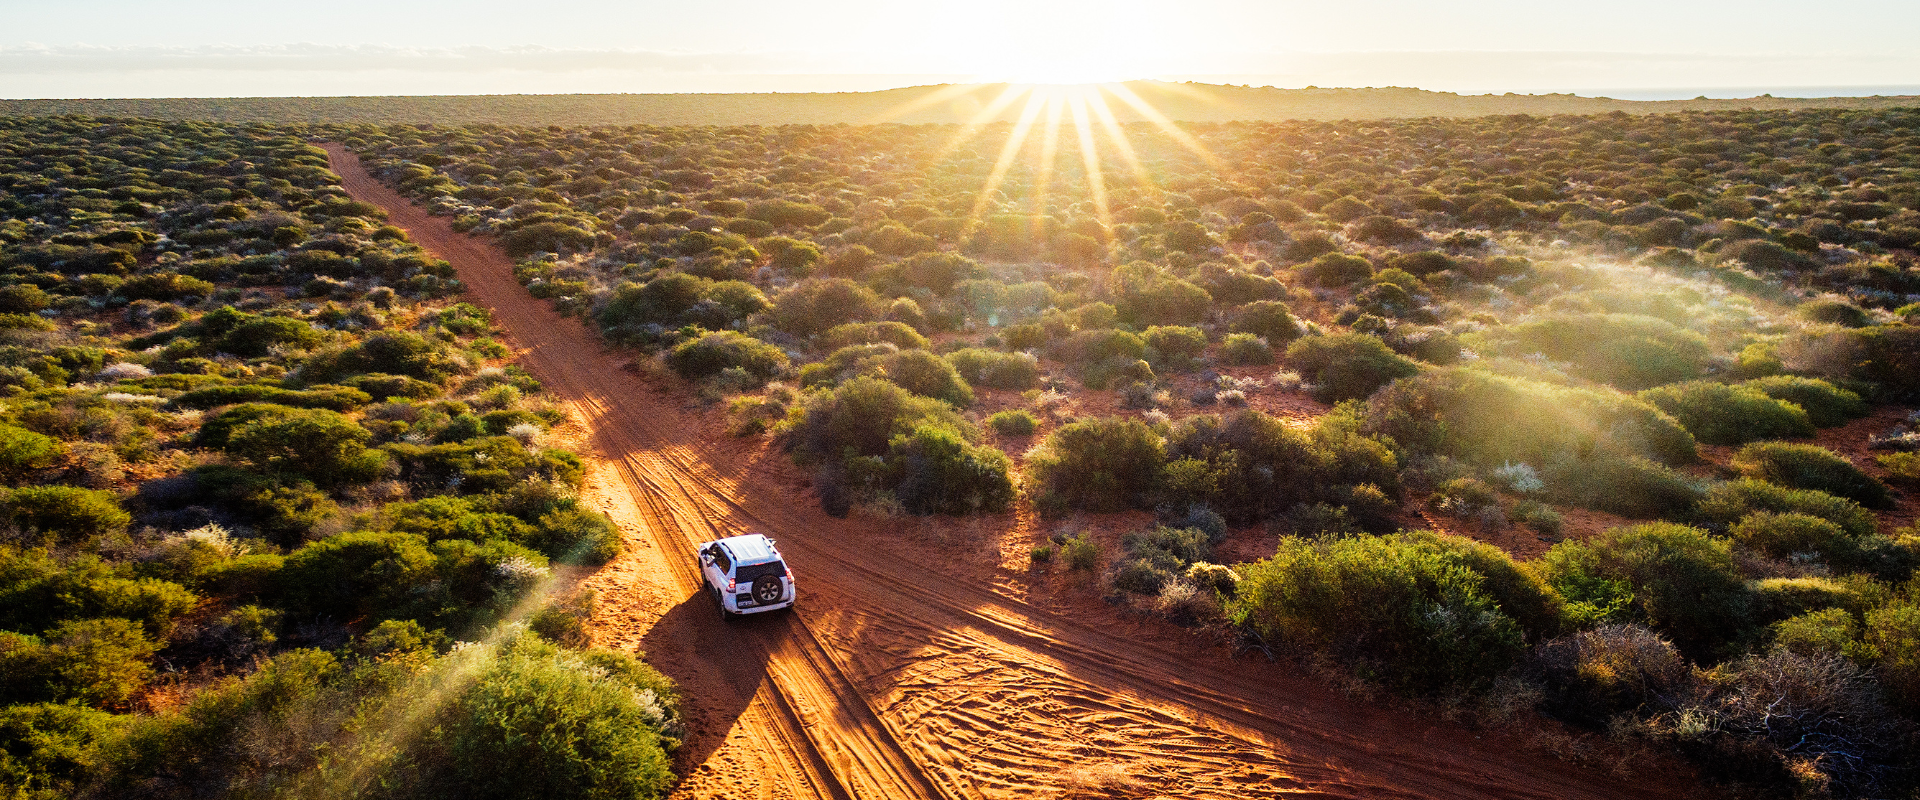 Driving off-road in Australia sunset